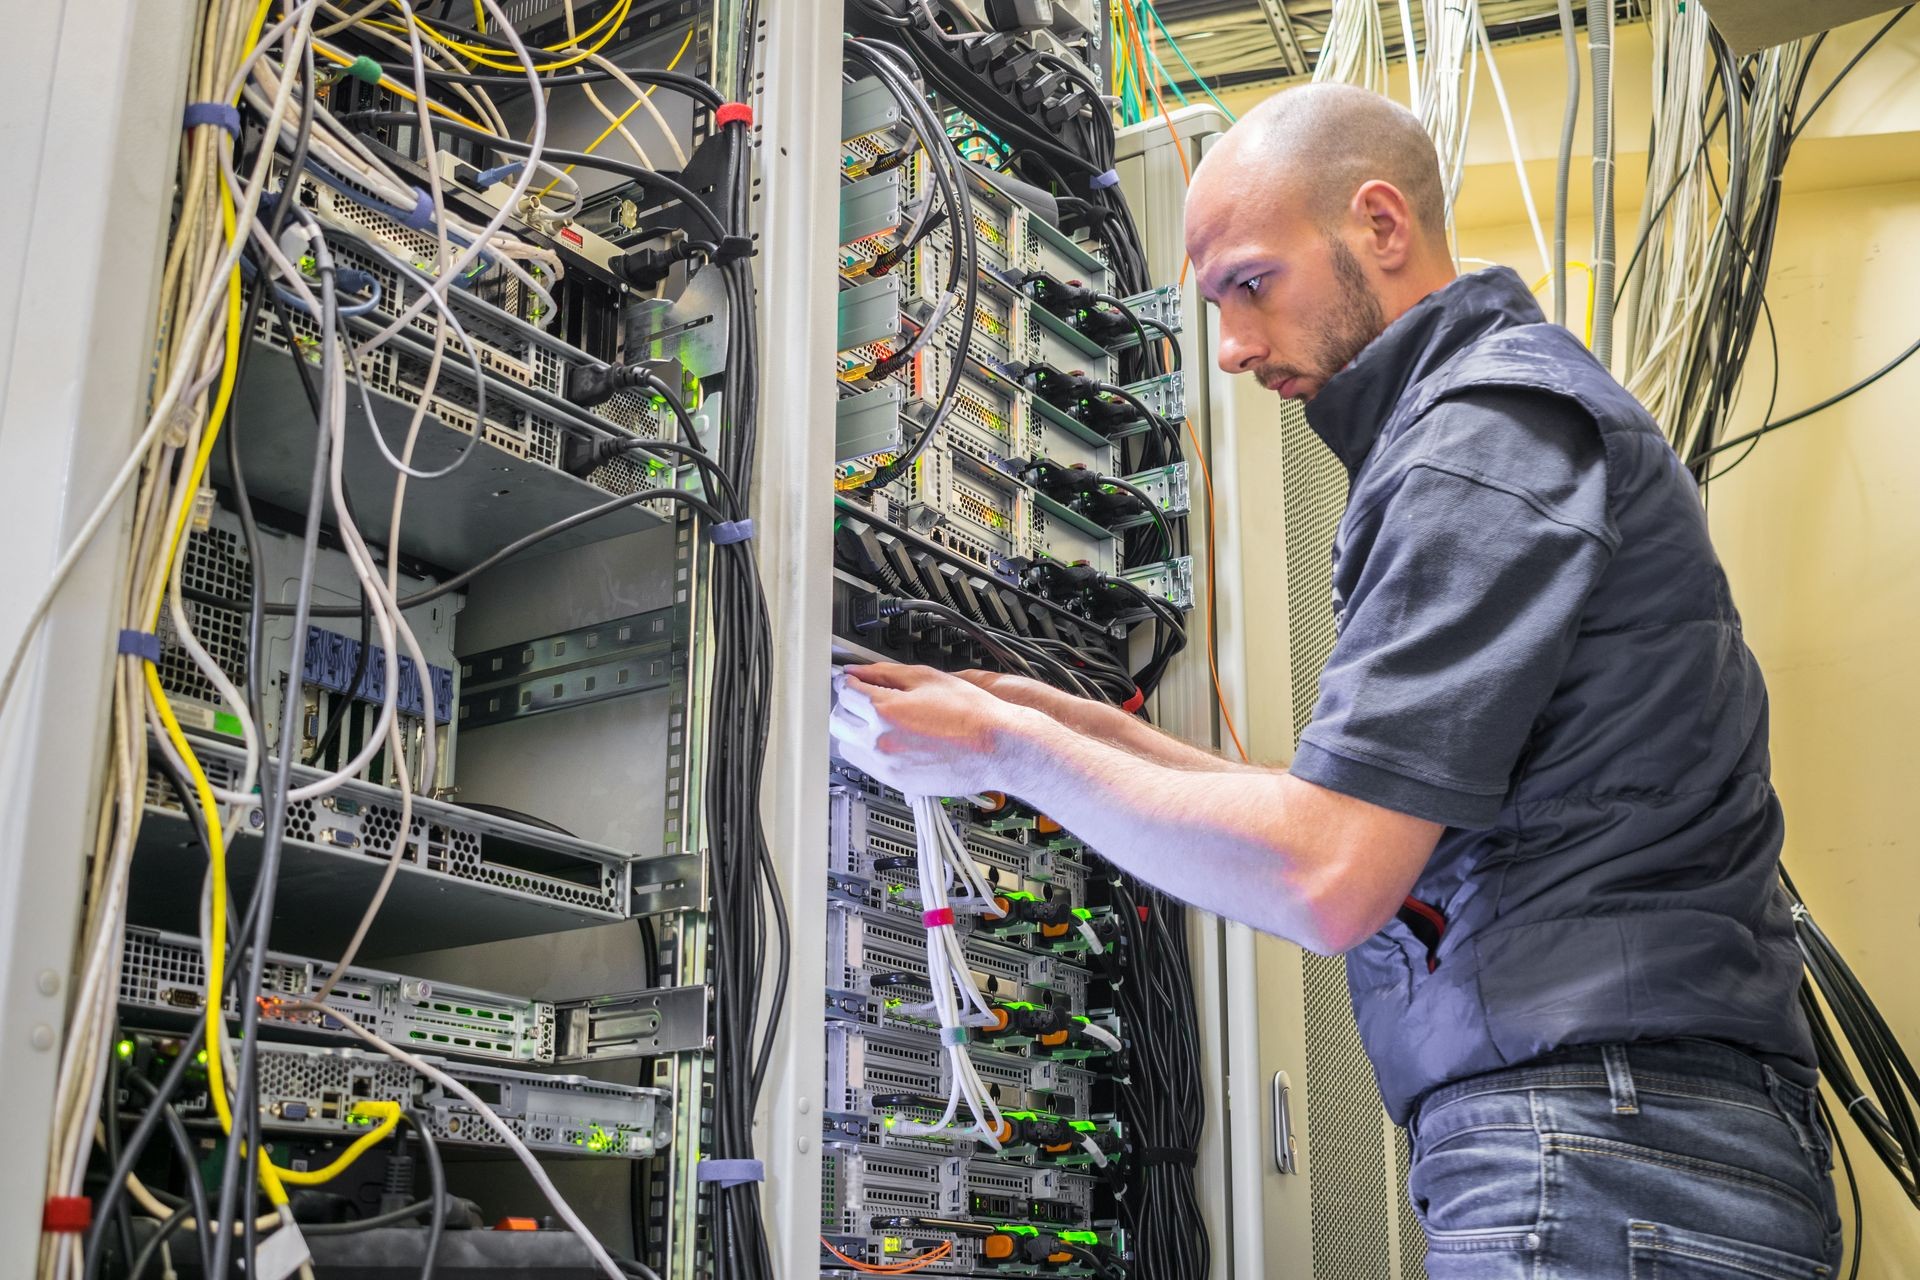 A specialist connects the wires in the server room of the data center. A man works with telecommunications equipment. The technician switches the Internet cable of the powerful routers.